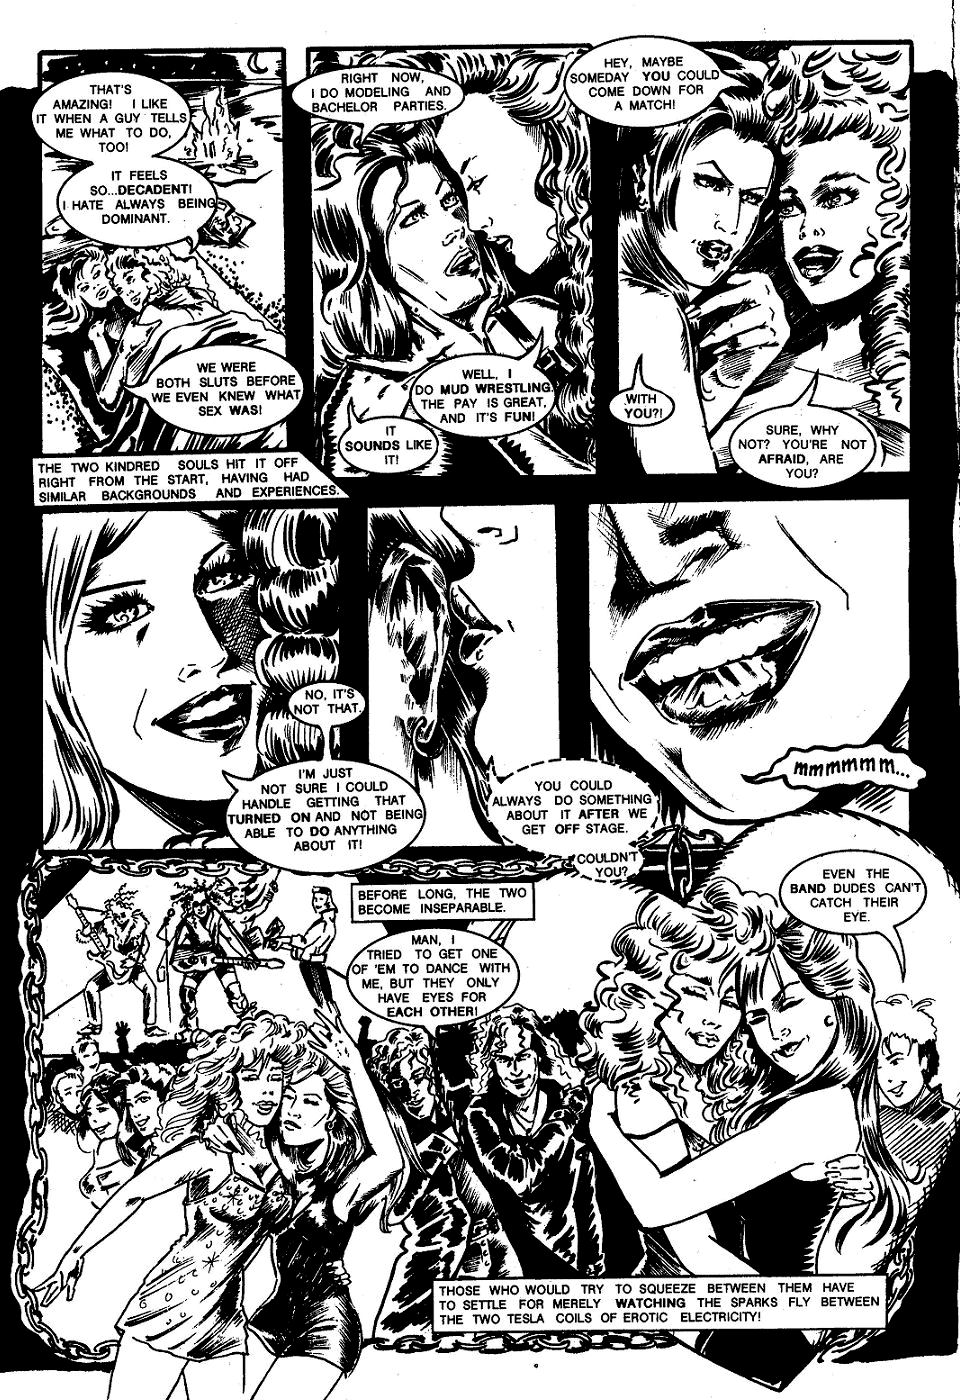 Re-Visionary - Carnal Comix - BLONDAGE 